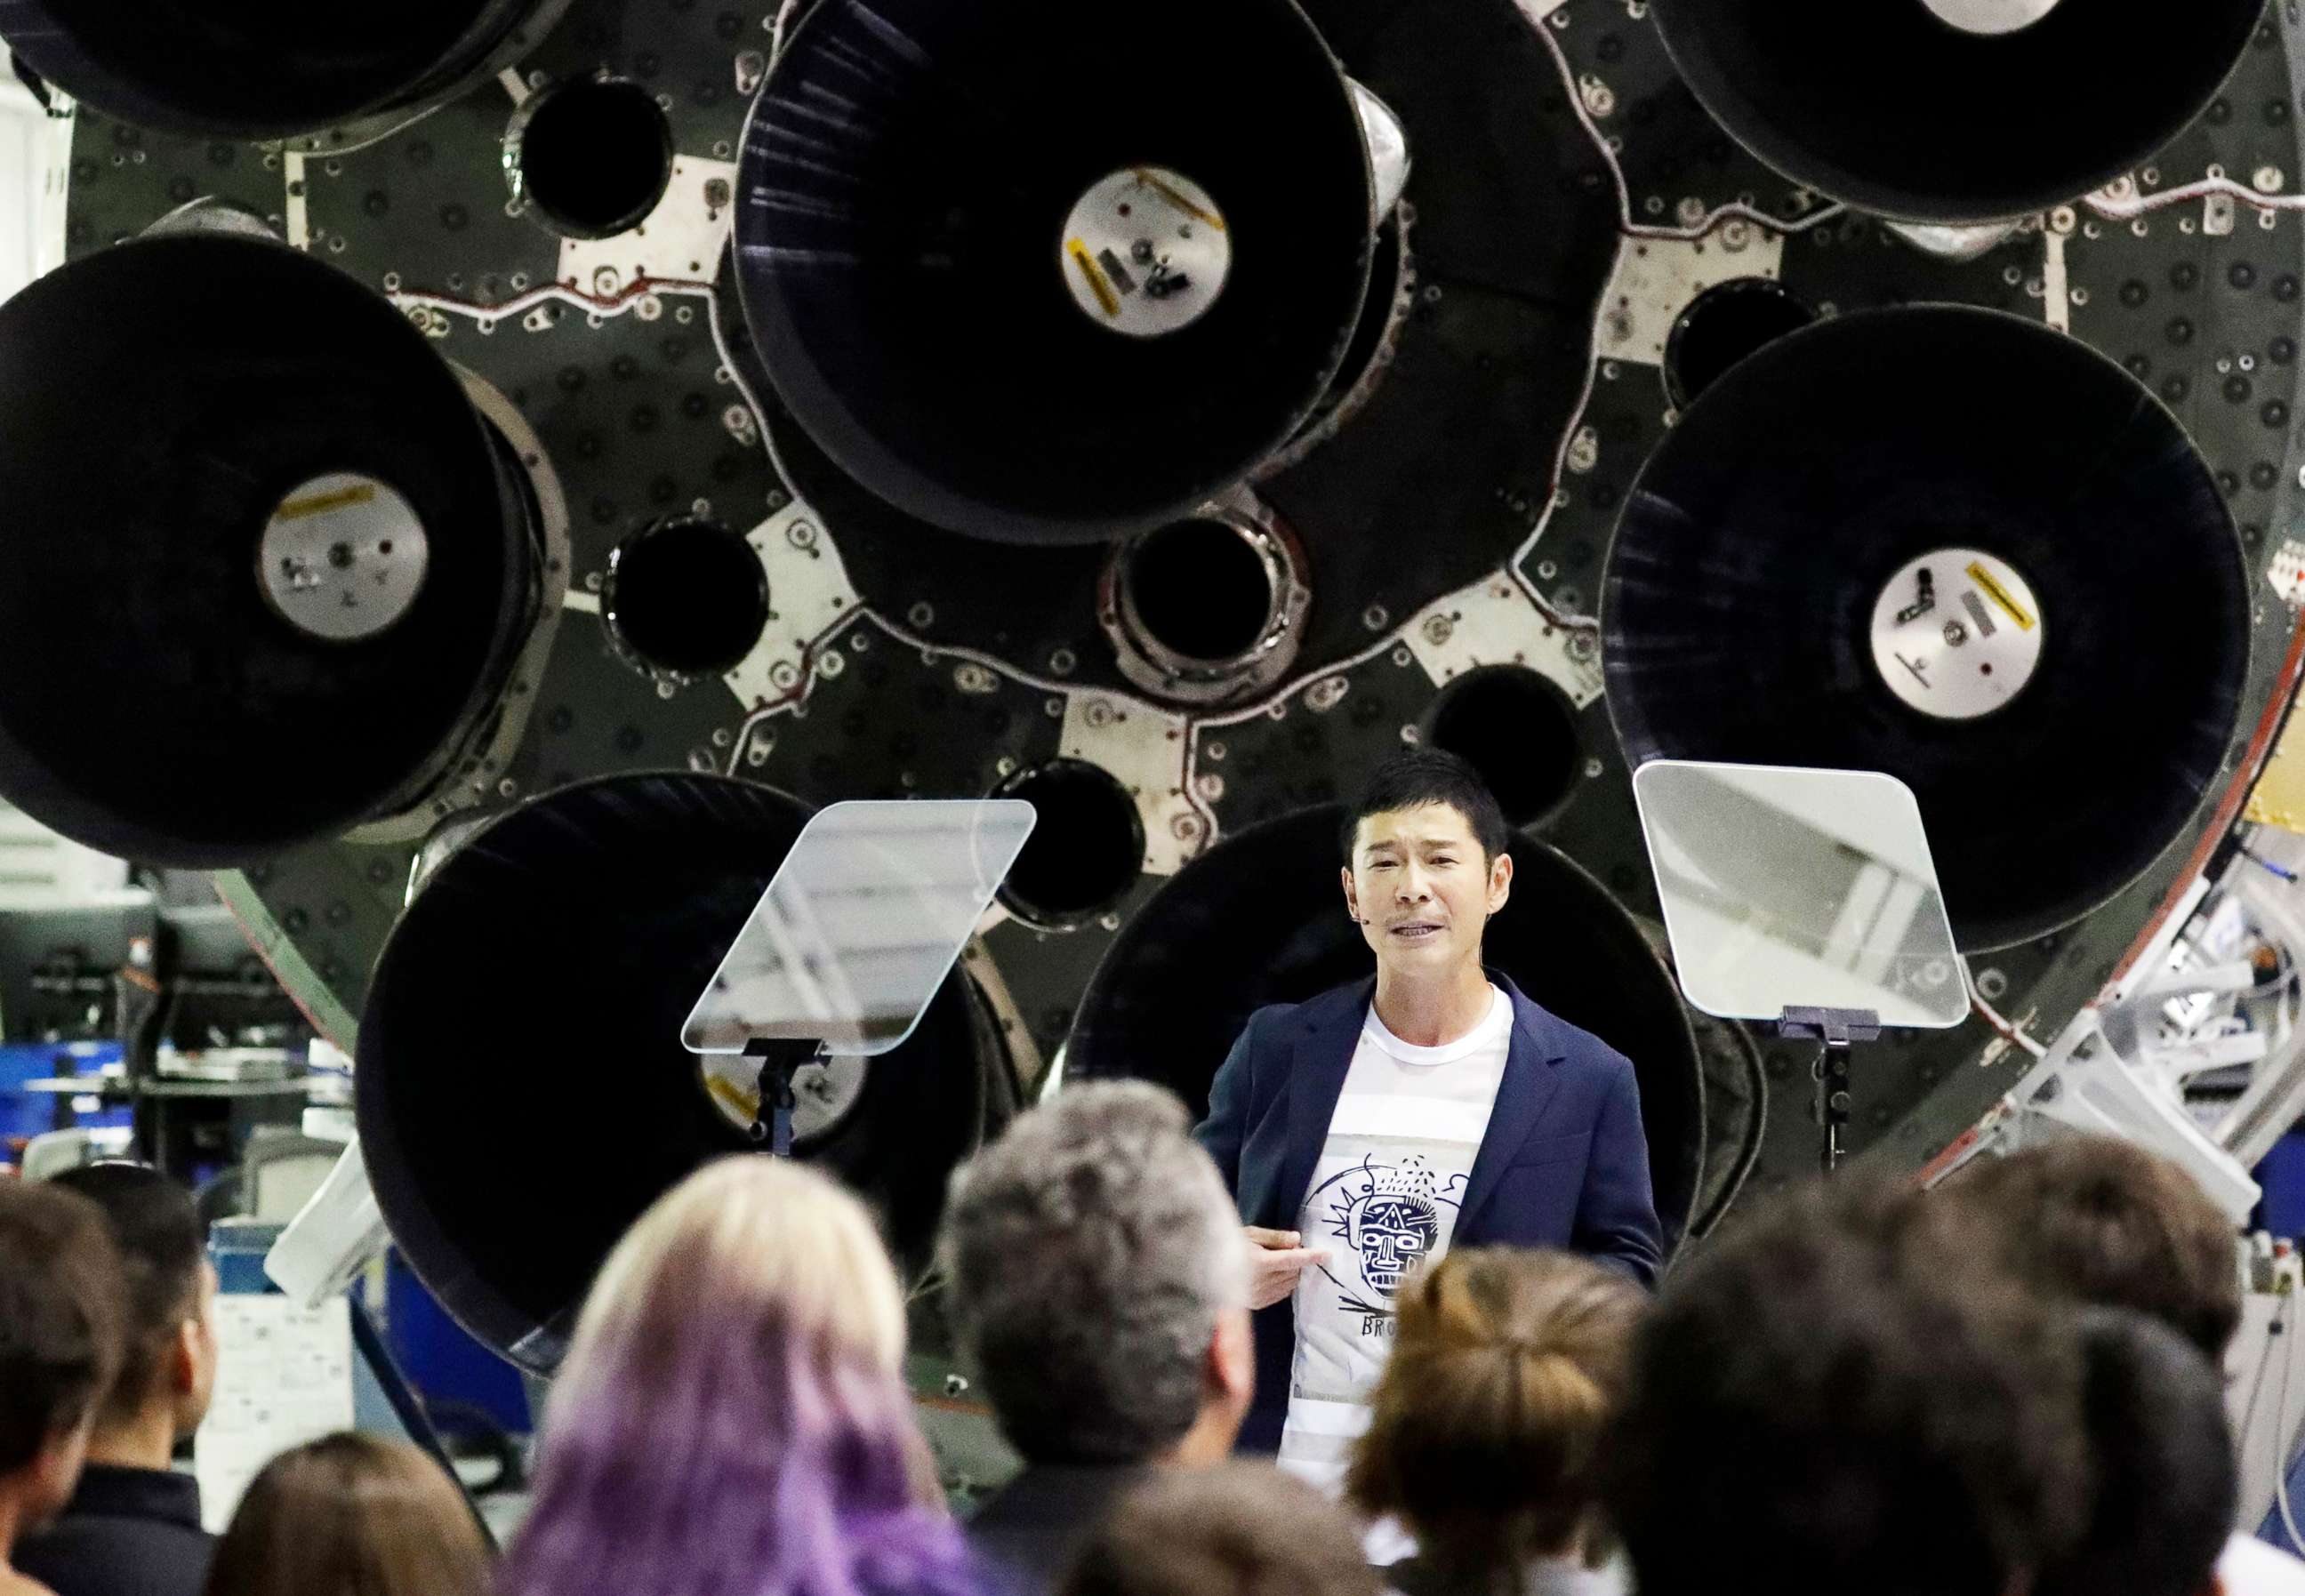 PHOTO: Japanese billionaire Yusaku Maezawa speaks after SpaceX founder and chief executive Elon Musk announced him as the person who would be the first private passenger on a trip around the moon, Sept. 17, 2018, in Hawthorne, Calif.